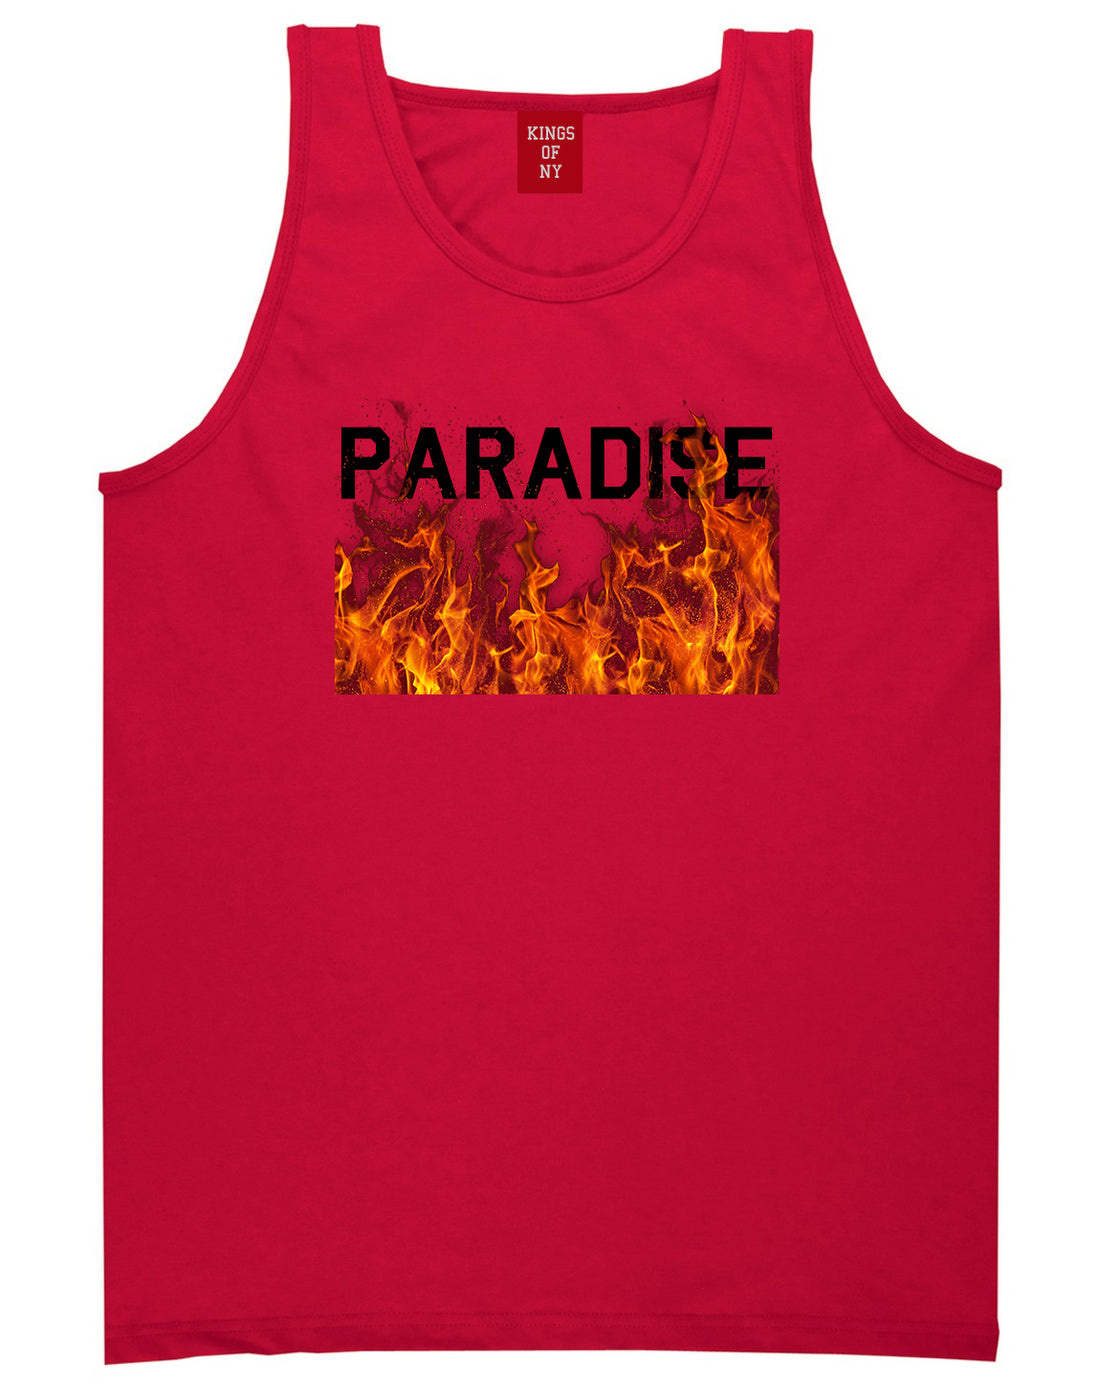 Paradise Fire Mens Tank Top Shirt Red by Kings Of NY